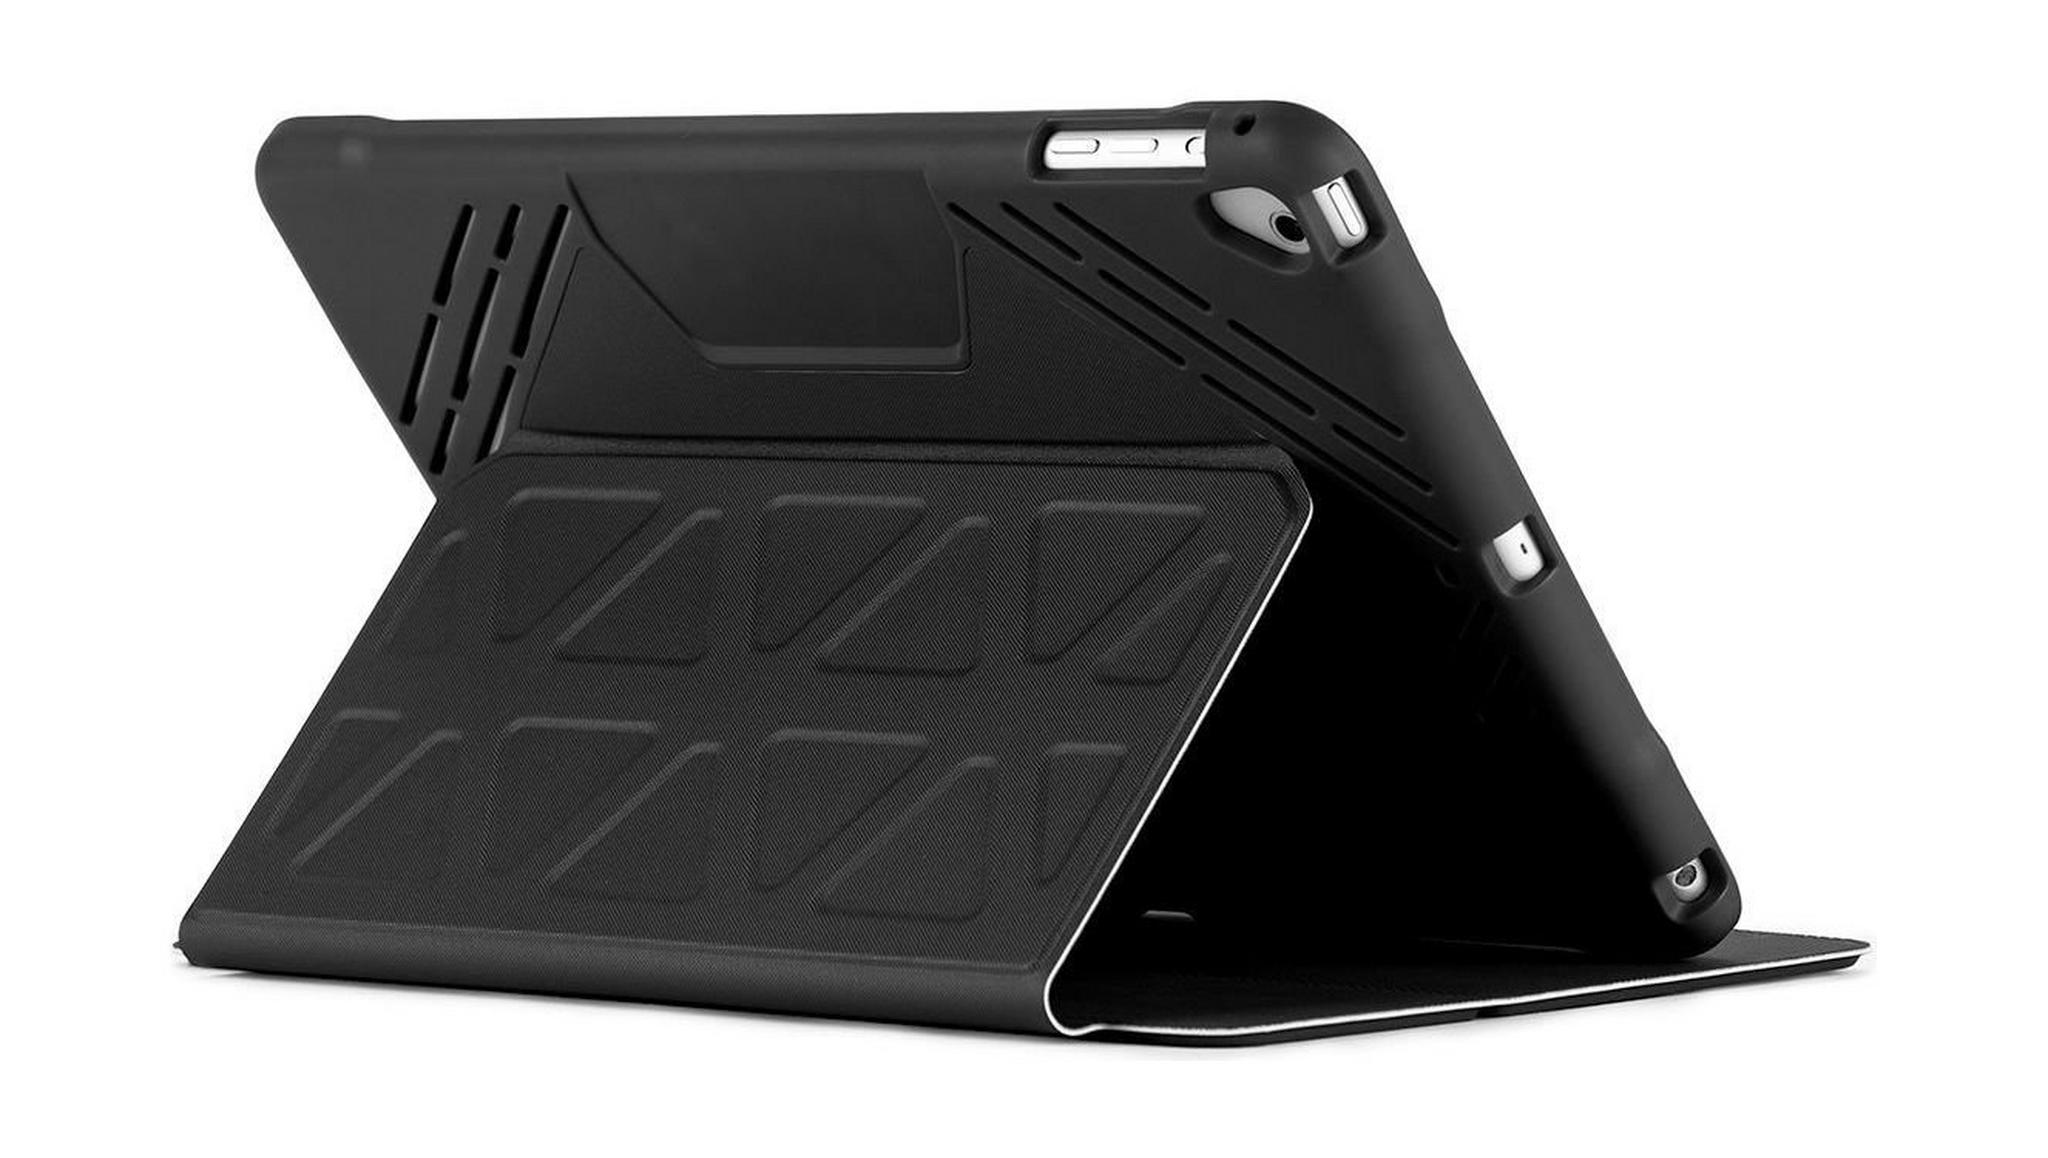 Targus 9.7-inch 3D Protection Case For iPad Pro (THZ635GL) – Black